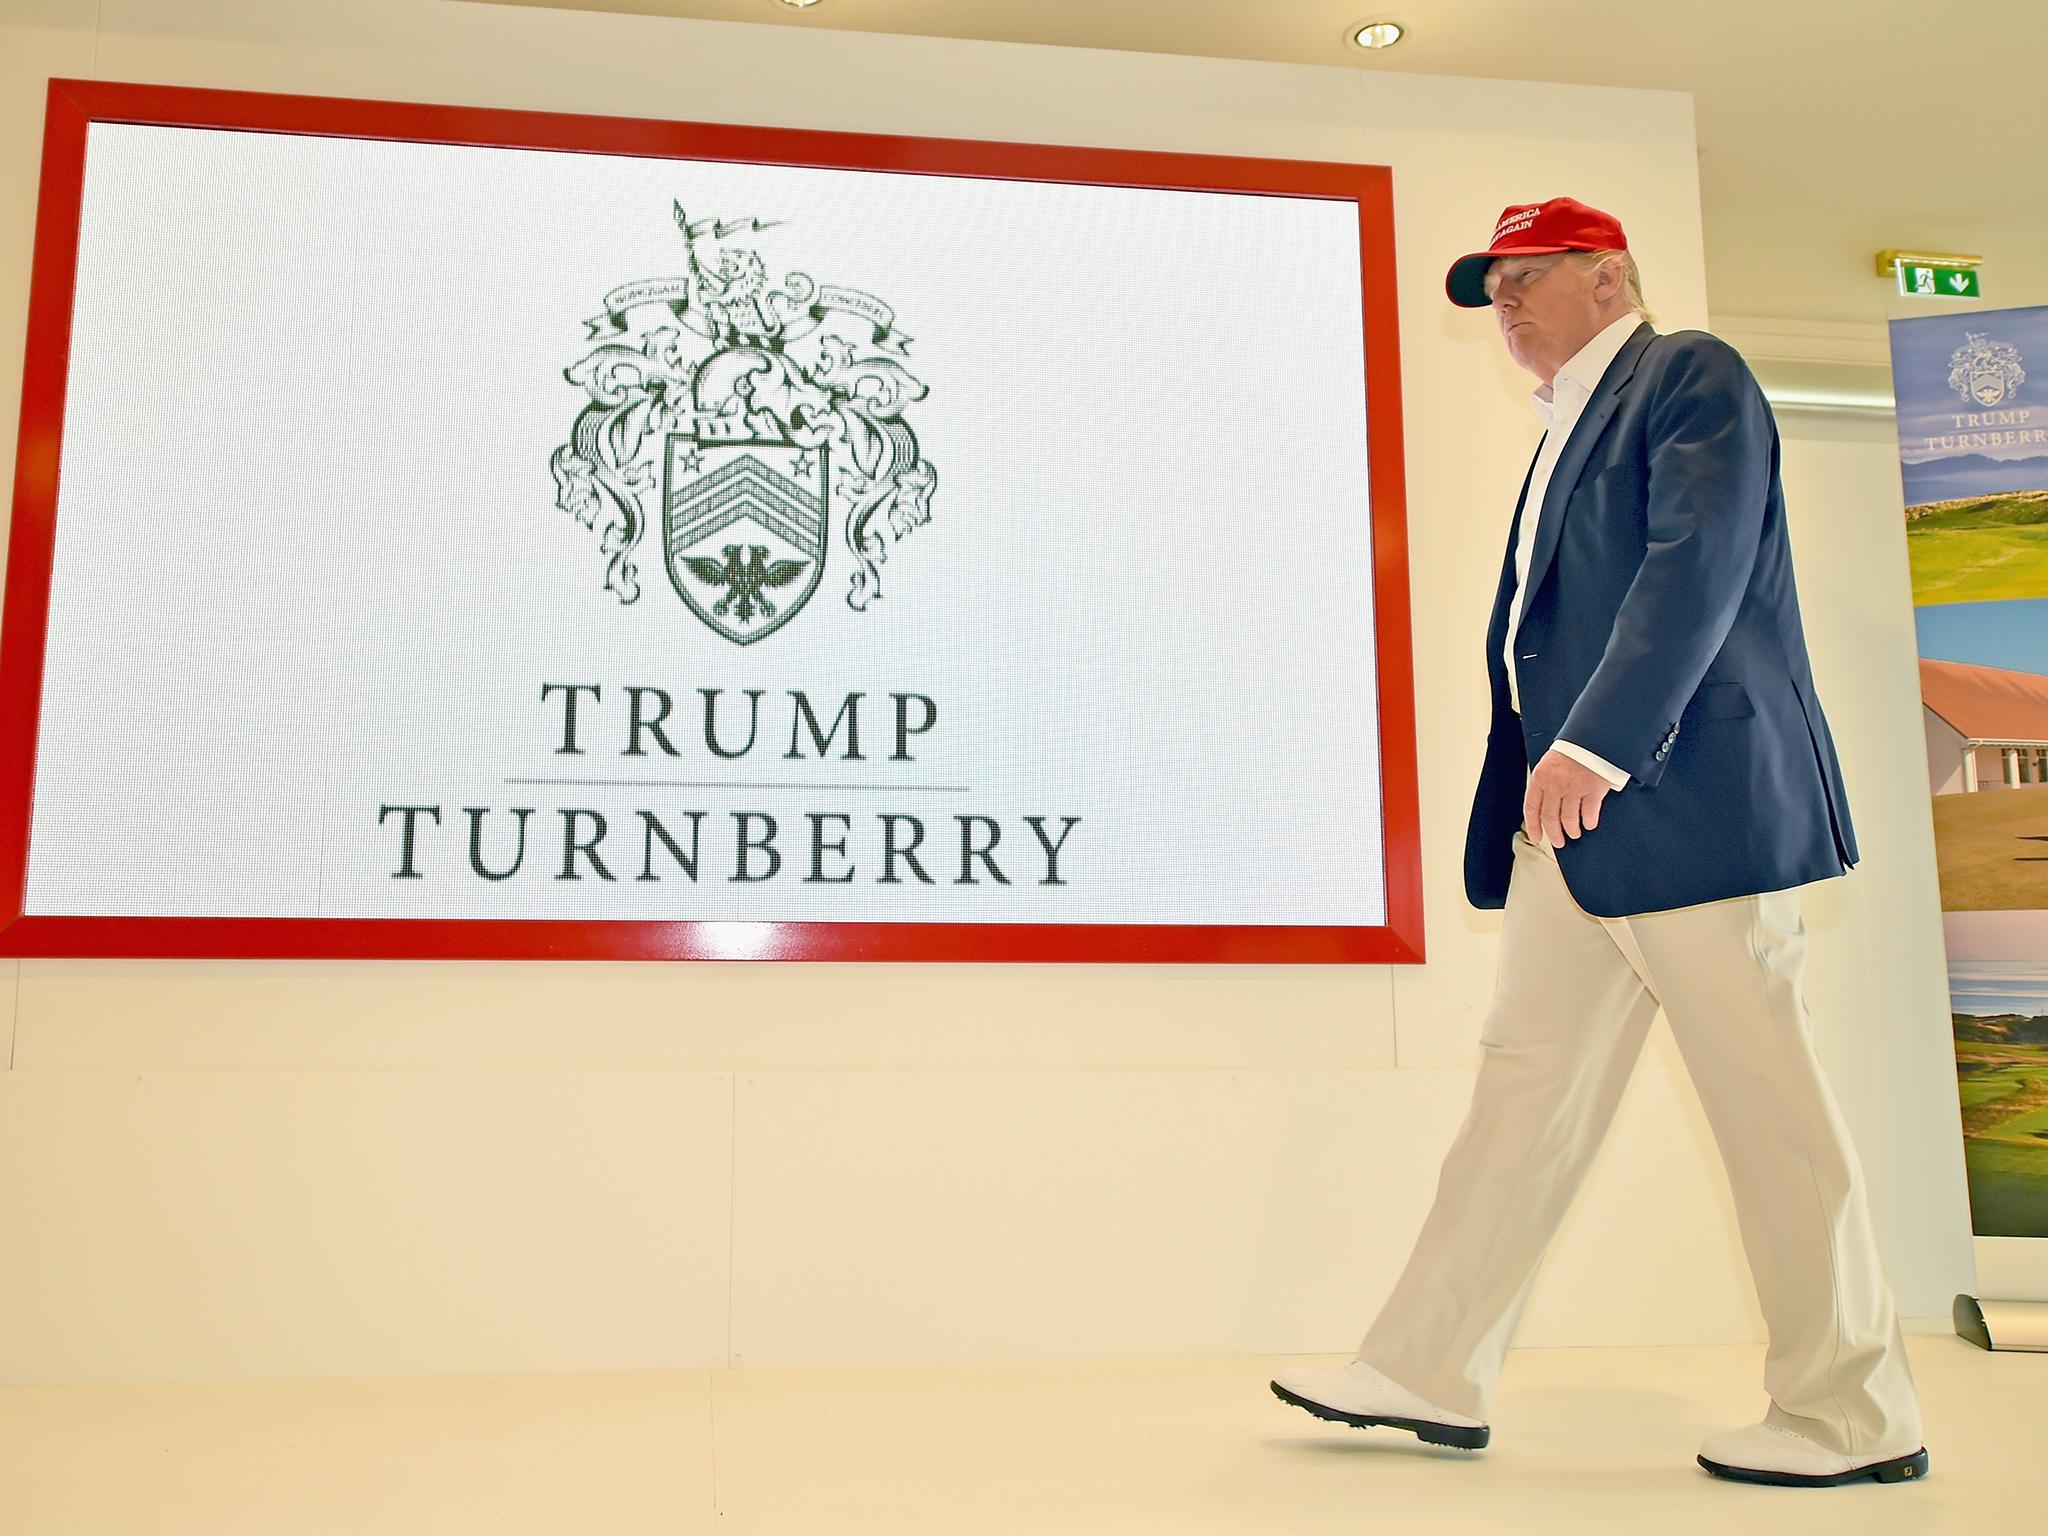 The Turnberry golf course, which has hosted the Open Championship on numerous occasions, is one of two famous golf courses Donald Trump owns in Scotland